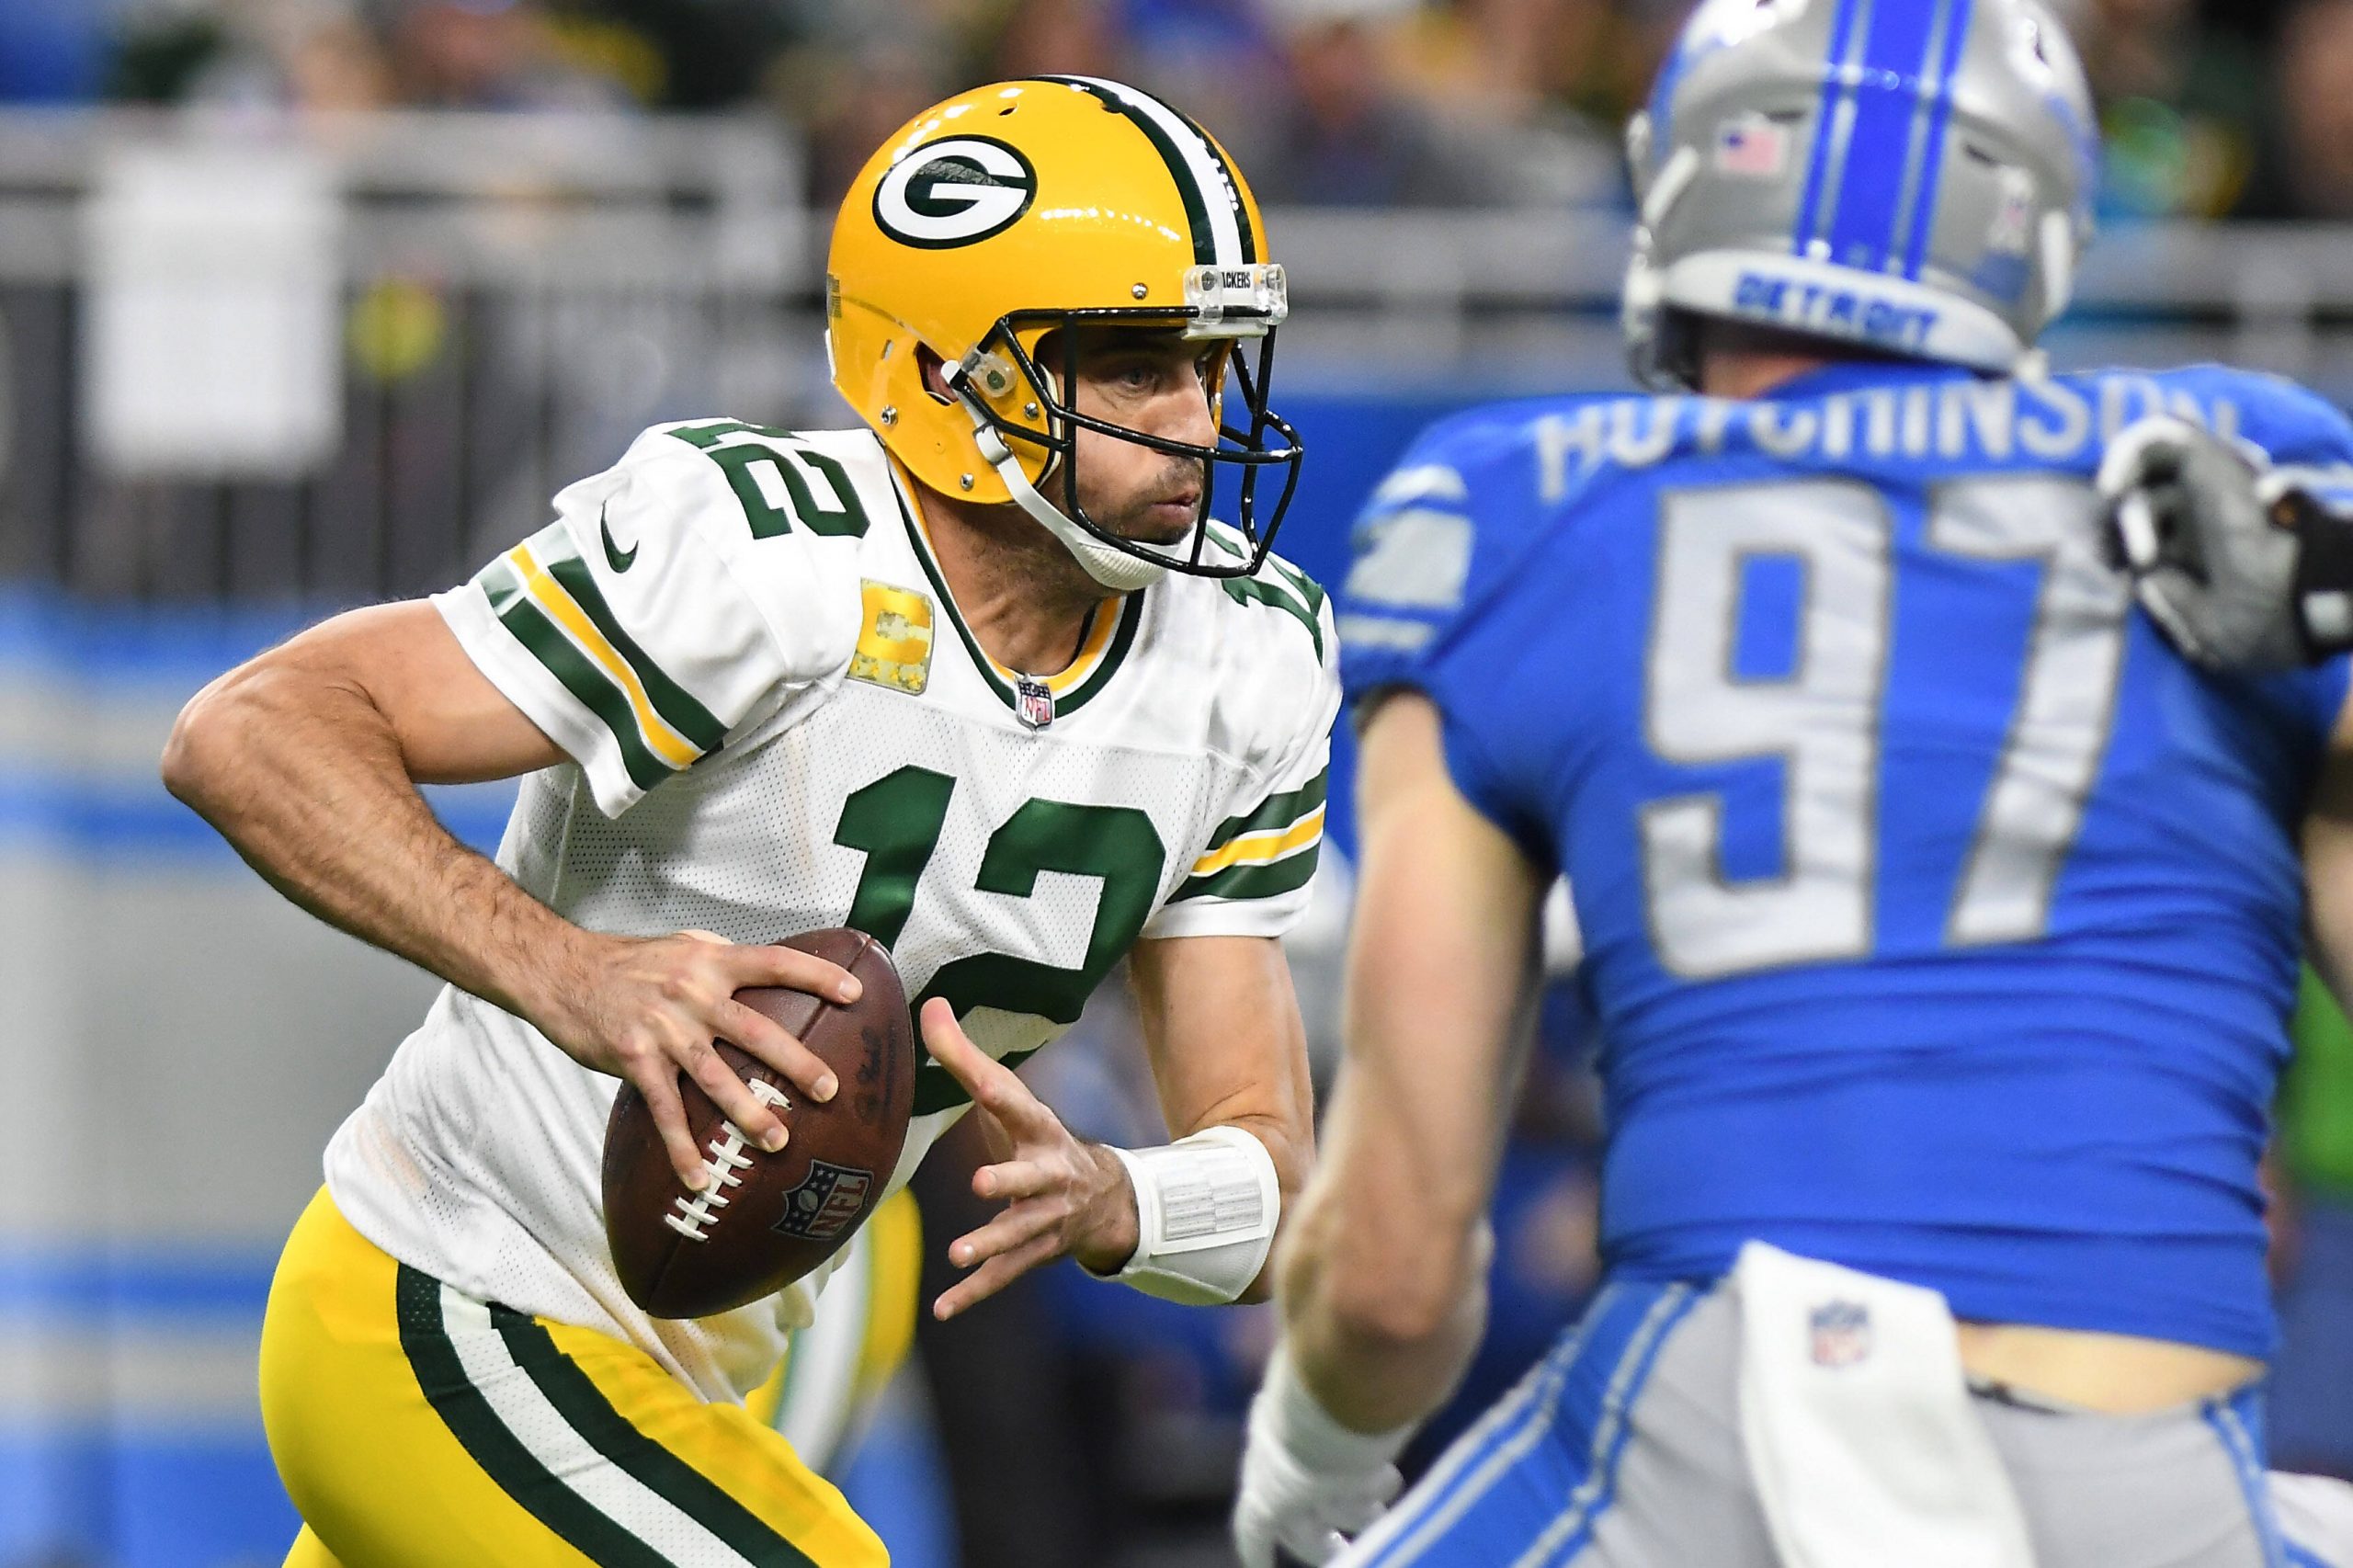 NFL, American Football Herren, USA Green Bay Packers at Detroit Lions Nov 6, 2022 Detroit, Michigan, USA Green Bay Packers quarterback Aaron Rodgers 12 rolls out of the pocket against the Detroit Lions in the first quarter at Ford Field. Detroit Ford Field Michigan USA, EDITORIAL USE ONLY PUBLICATIONxINxGERxSUIxAUTxONLY Copyright: xLonxHorwedelx 20221106_lbm_jr6_386